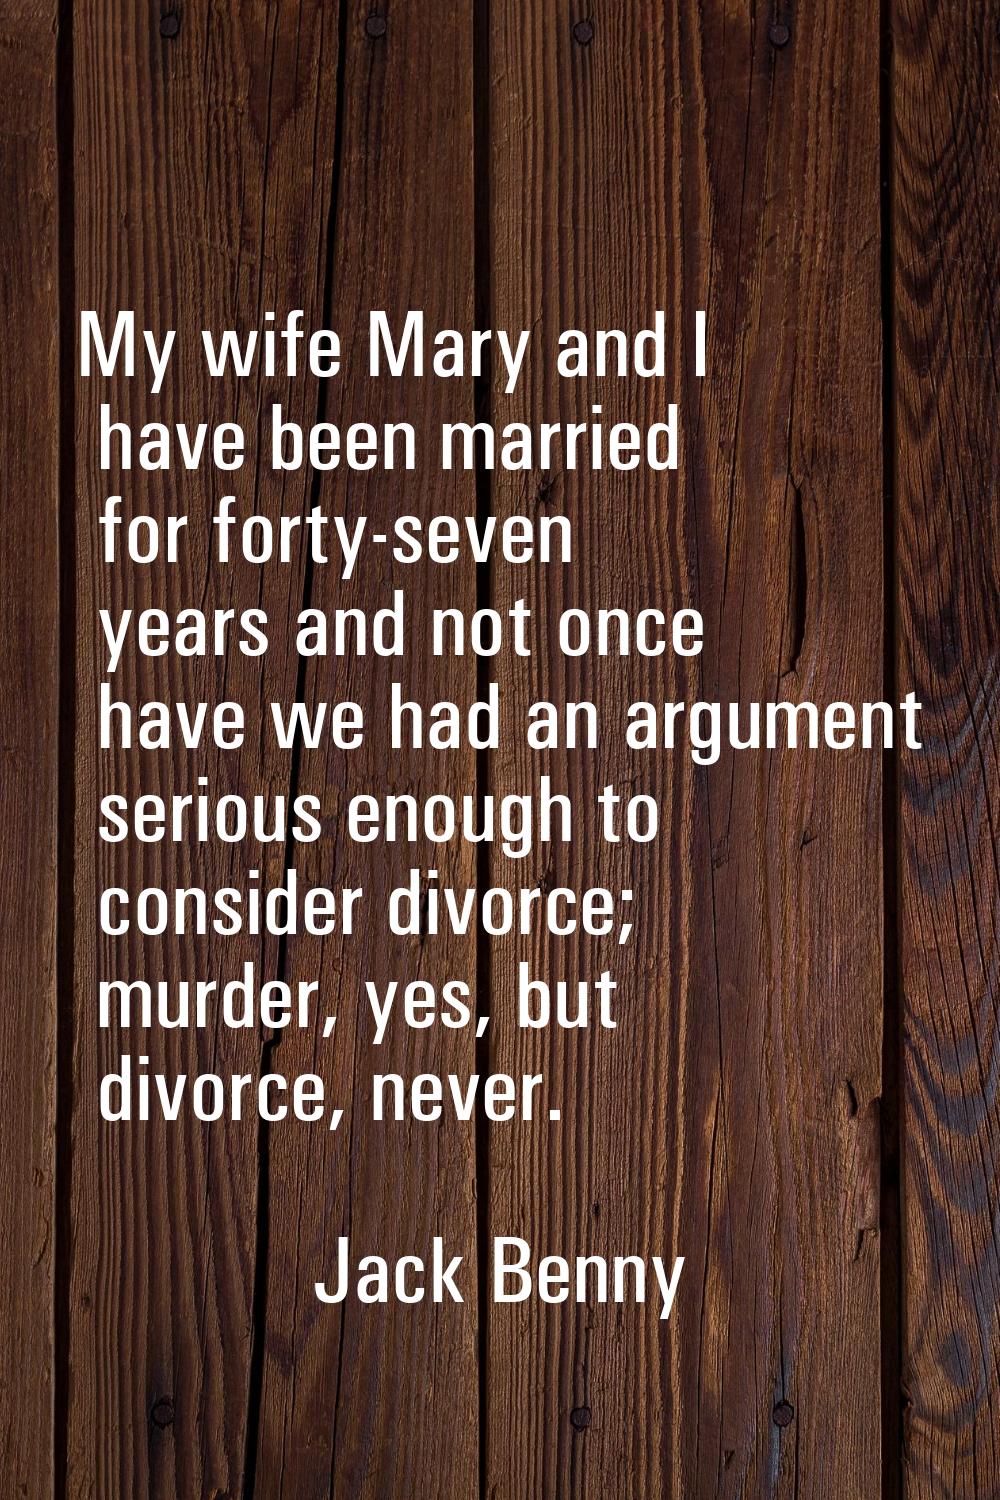 My wife Mary and I have been married for forty-seven years and not once have we had an argument ser